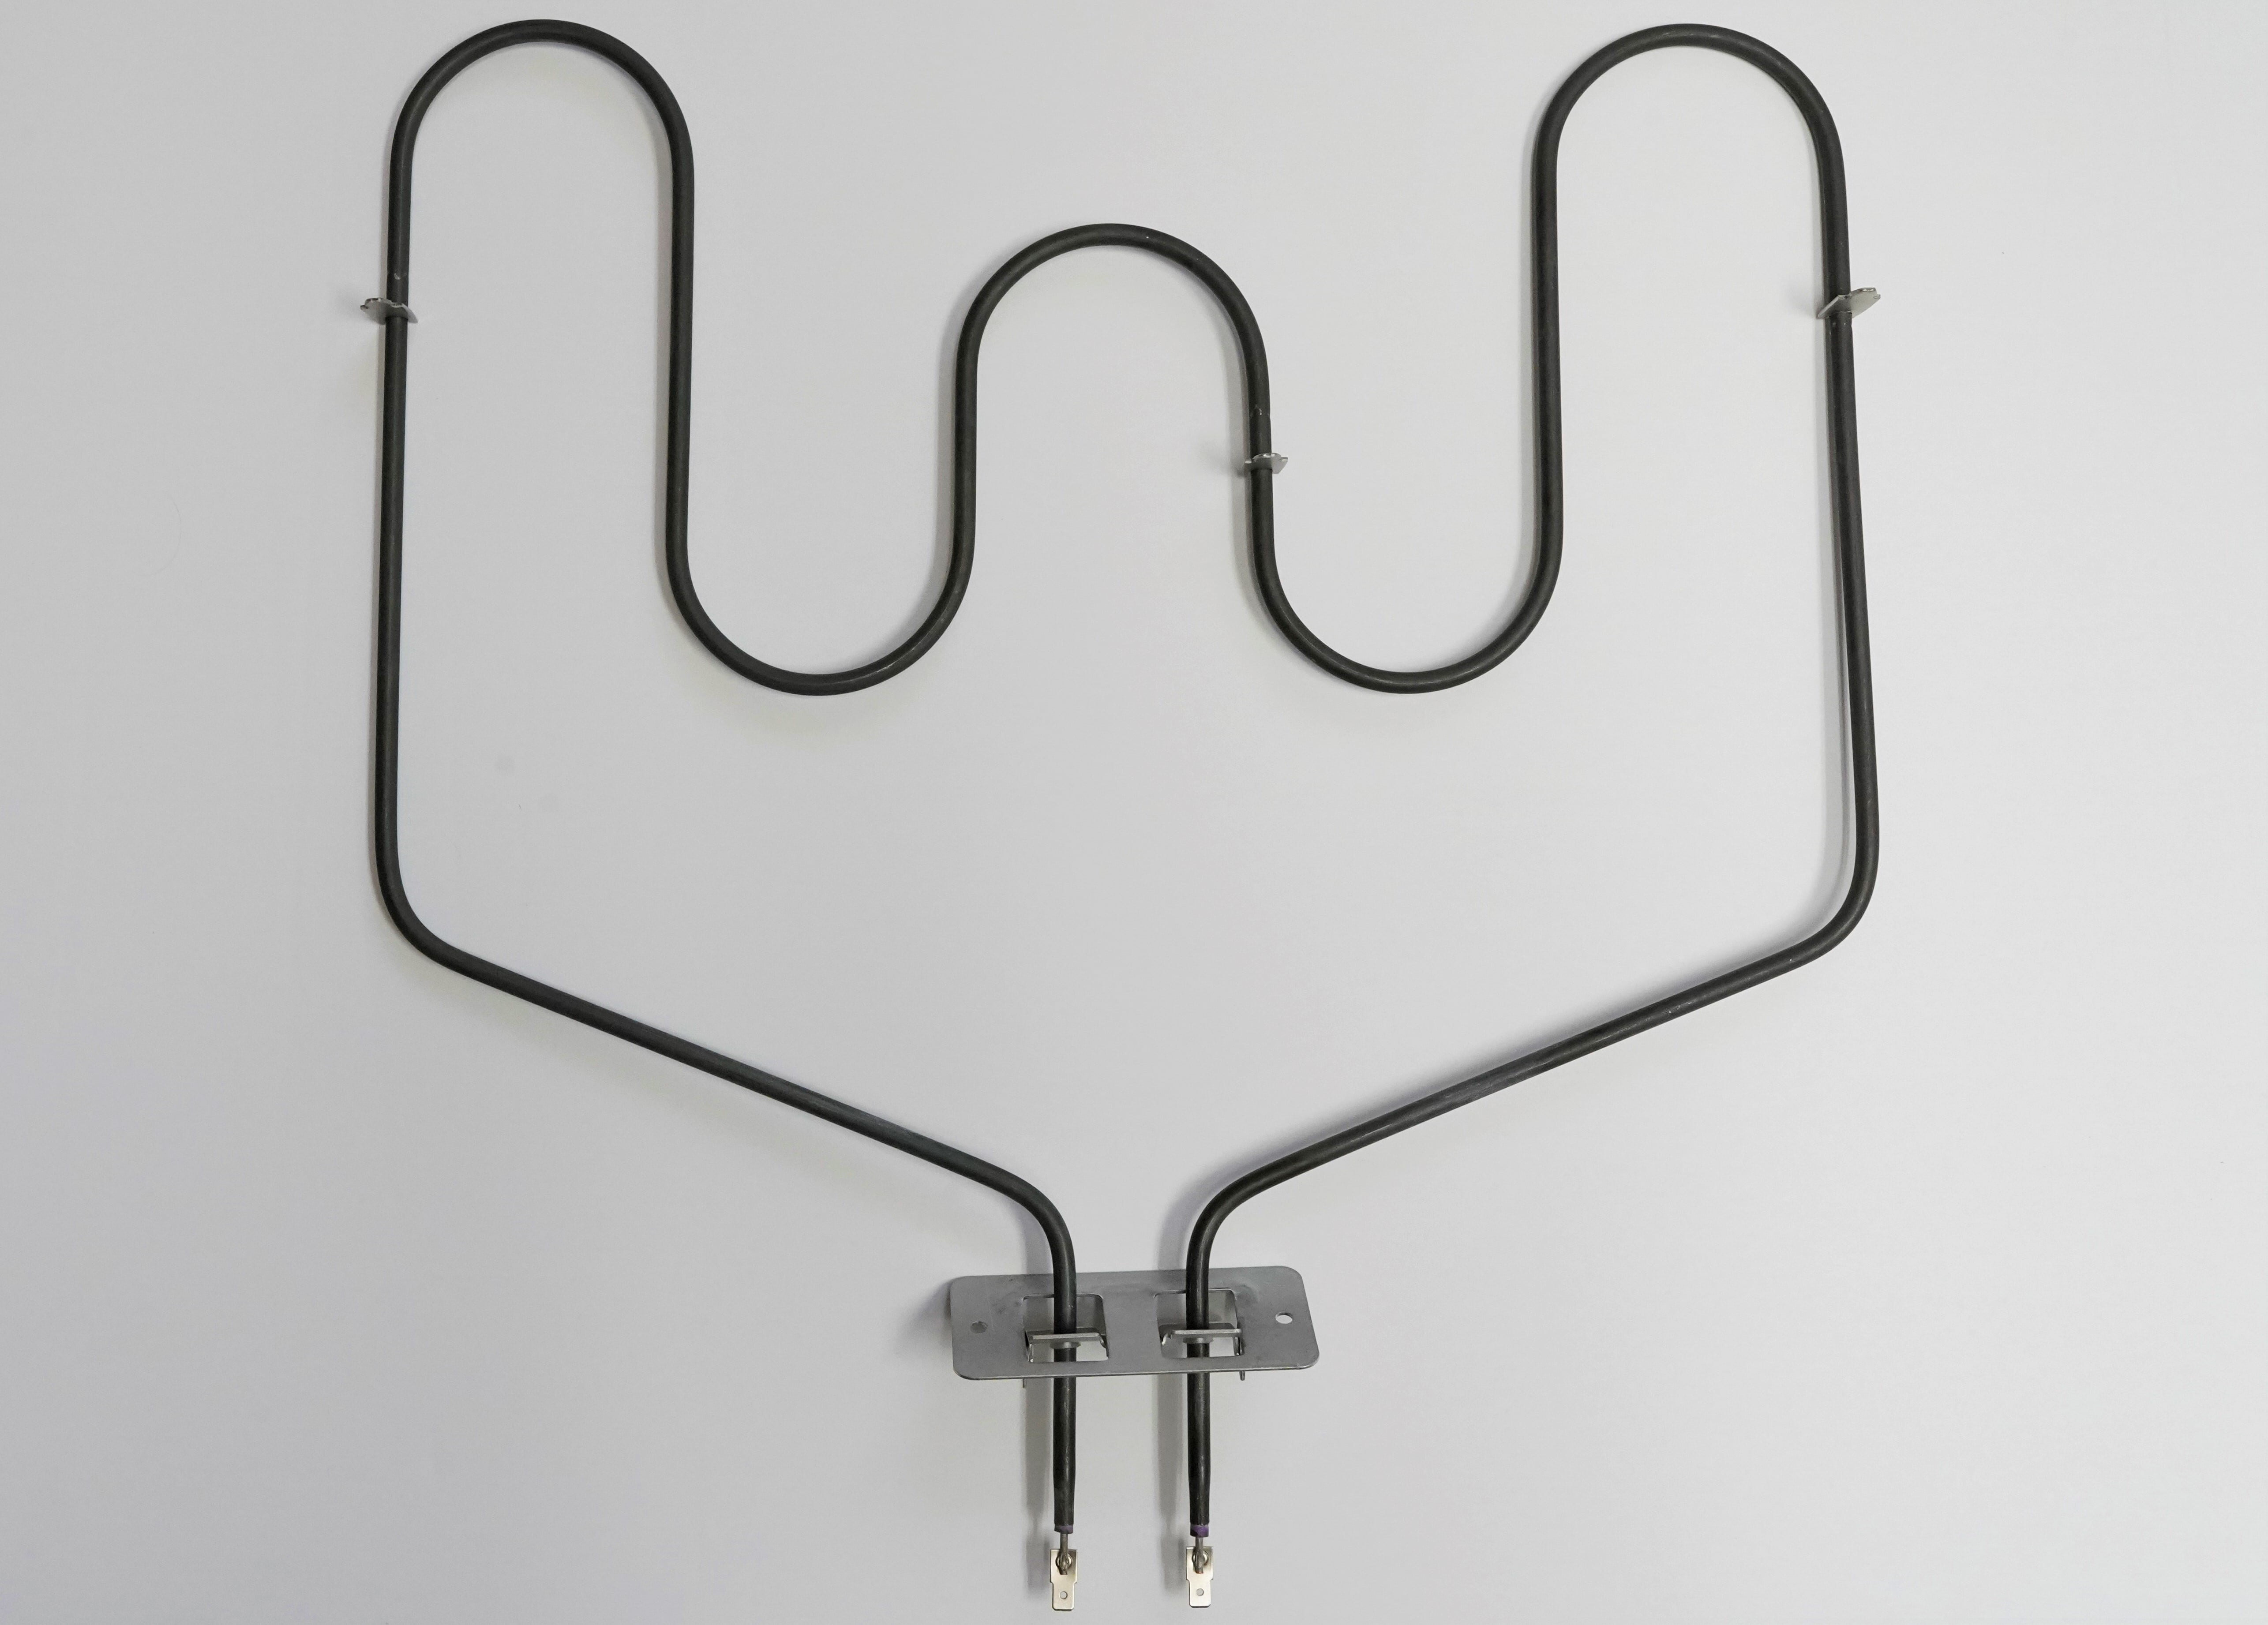 Details about   WB44T10011 Oven Range Stove Bake Heating Element Assembly for GE Hotpoint 